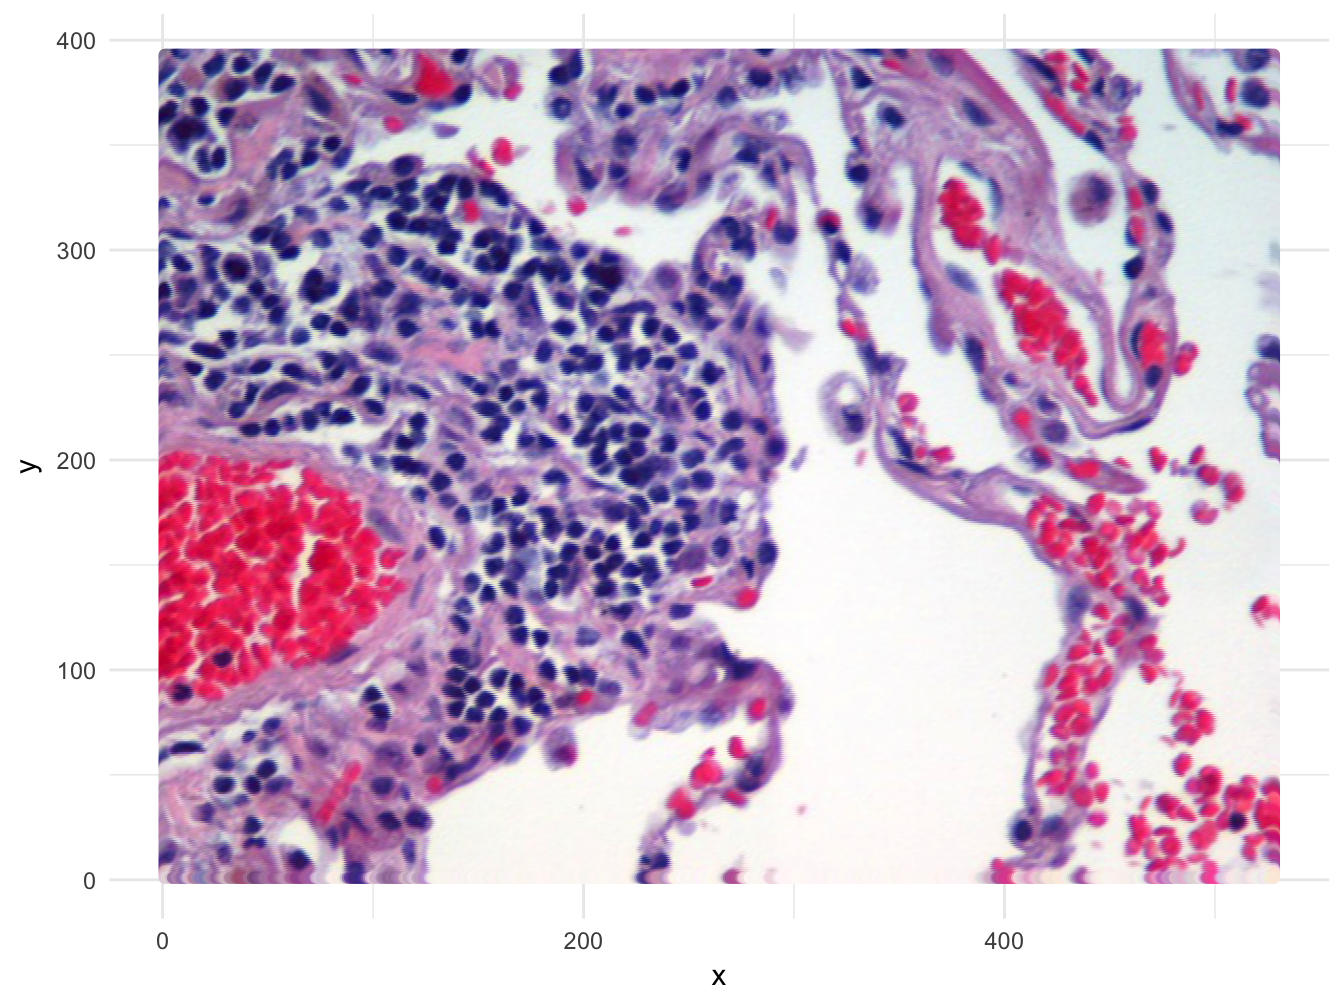 Image of lung tissue recreated from reshaped data.